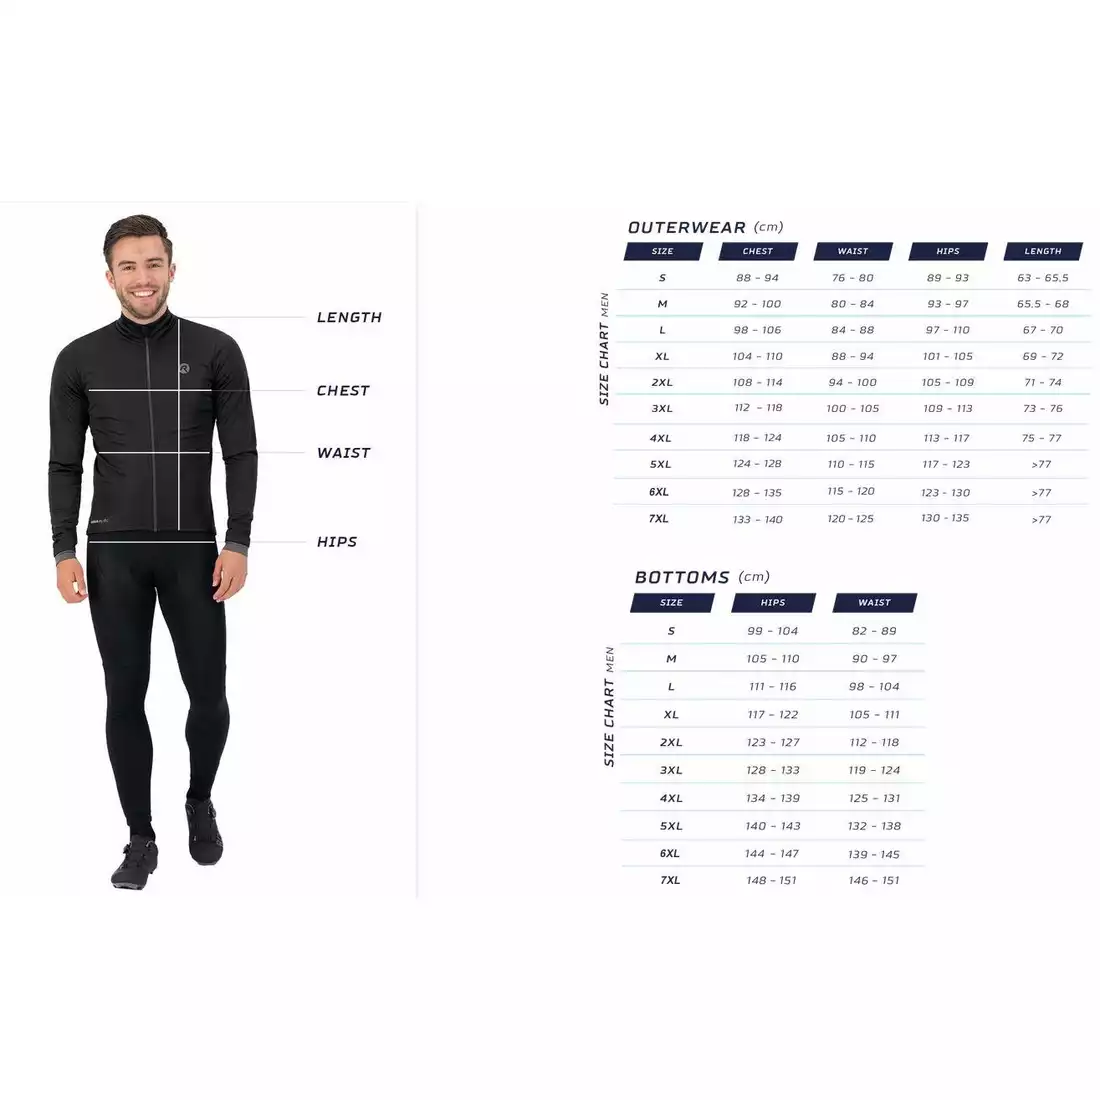 ROGELLI CORE insulated men's cycling jersey, black